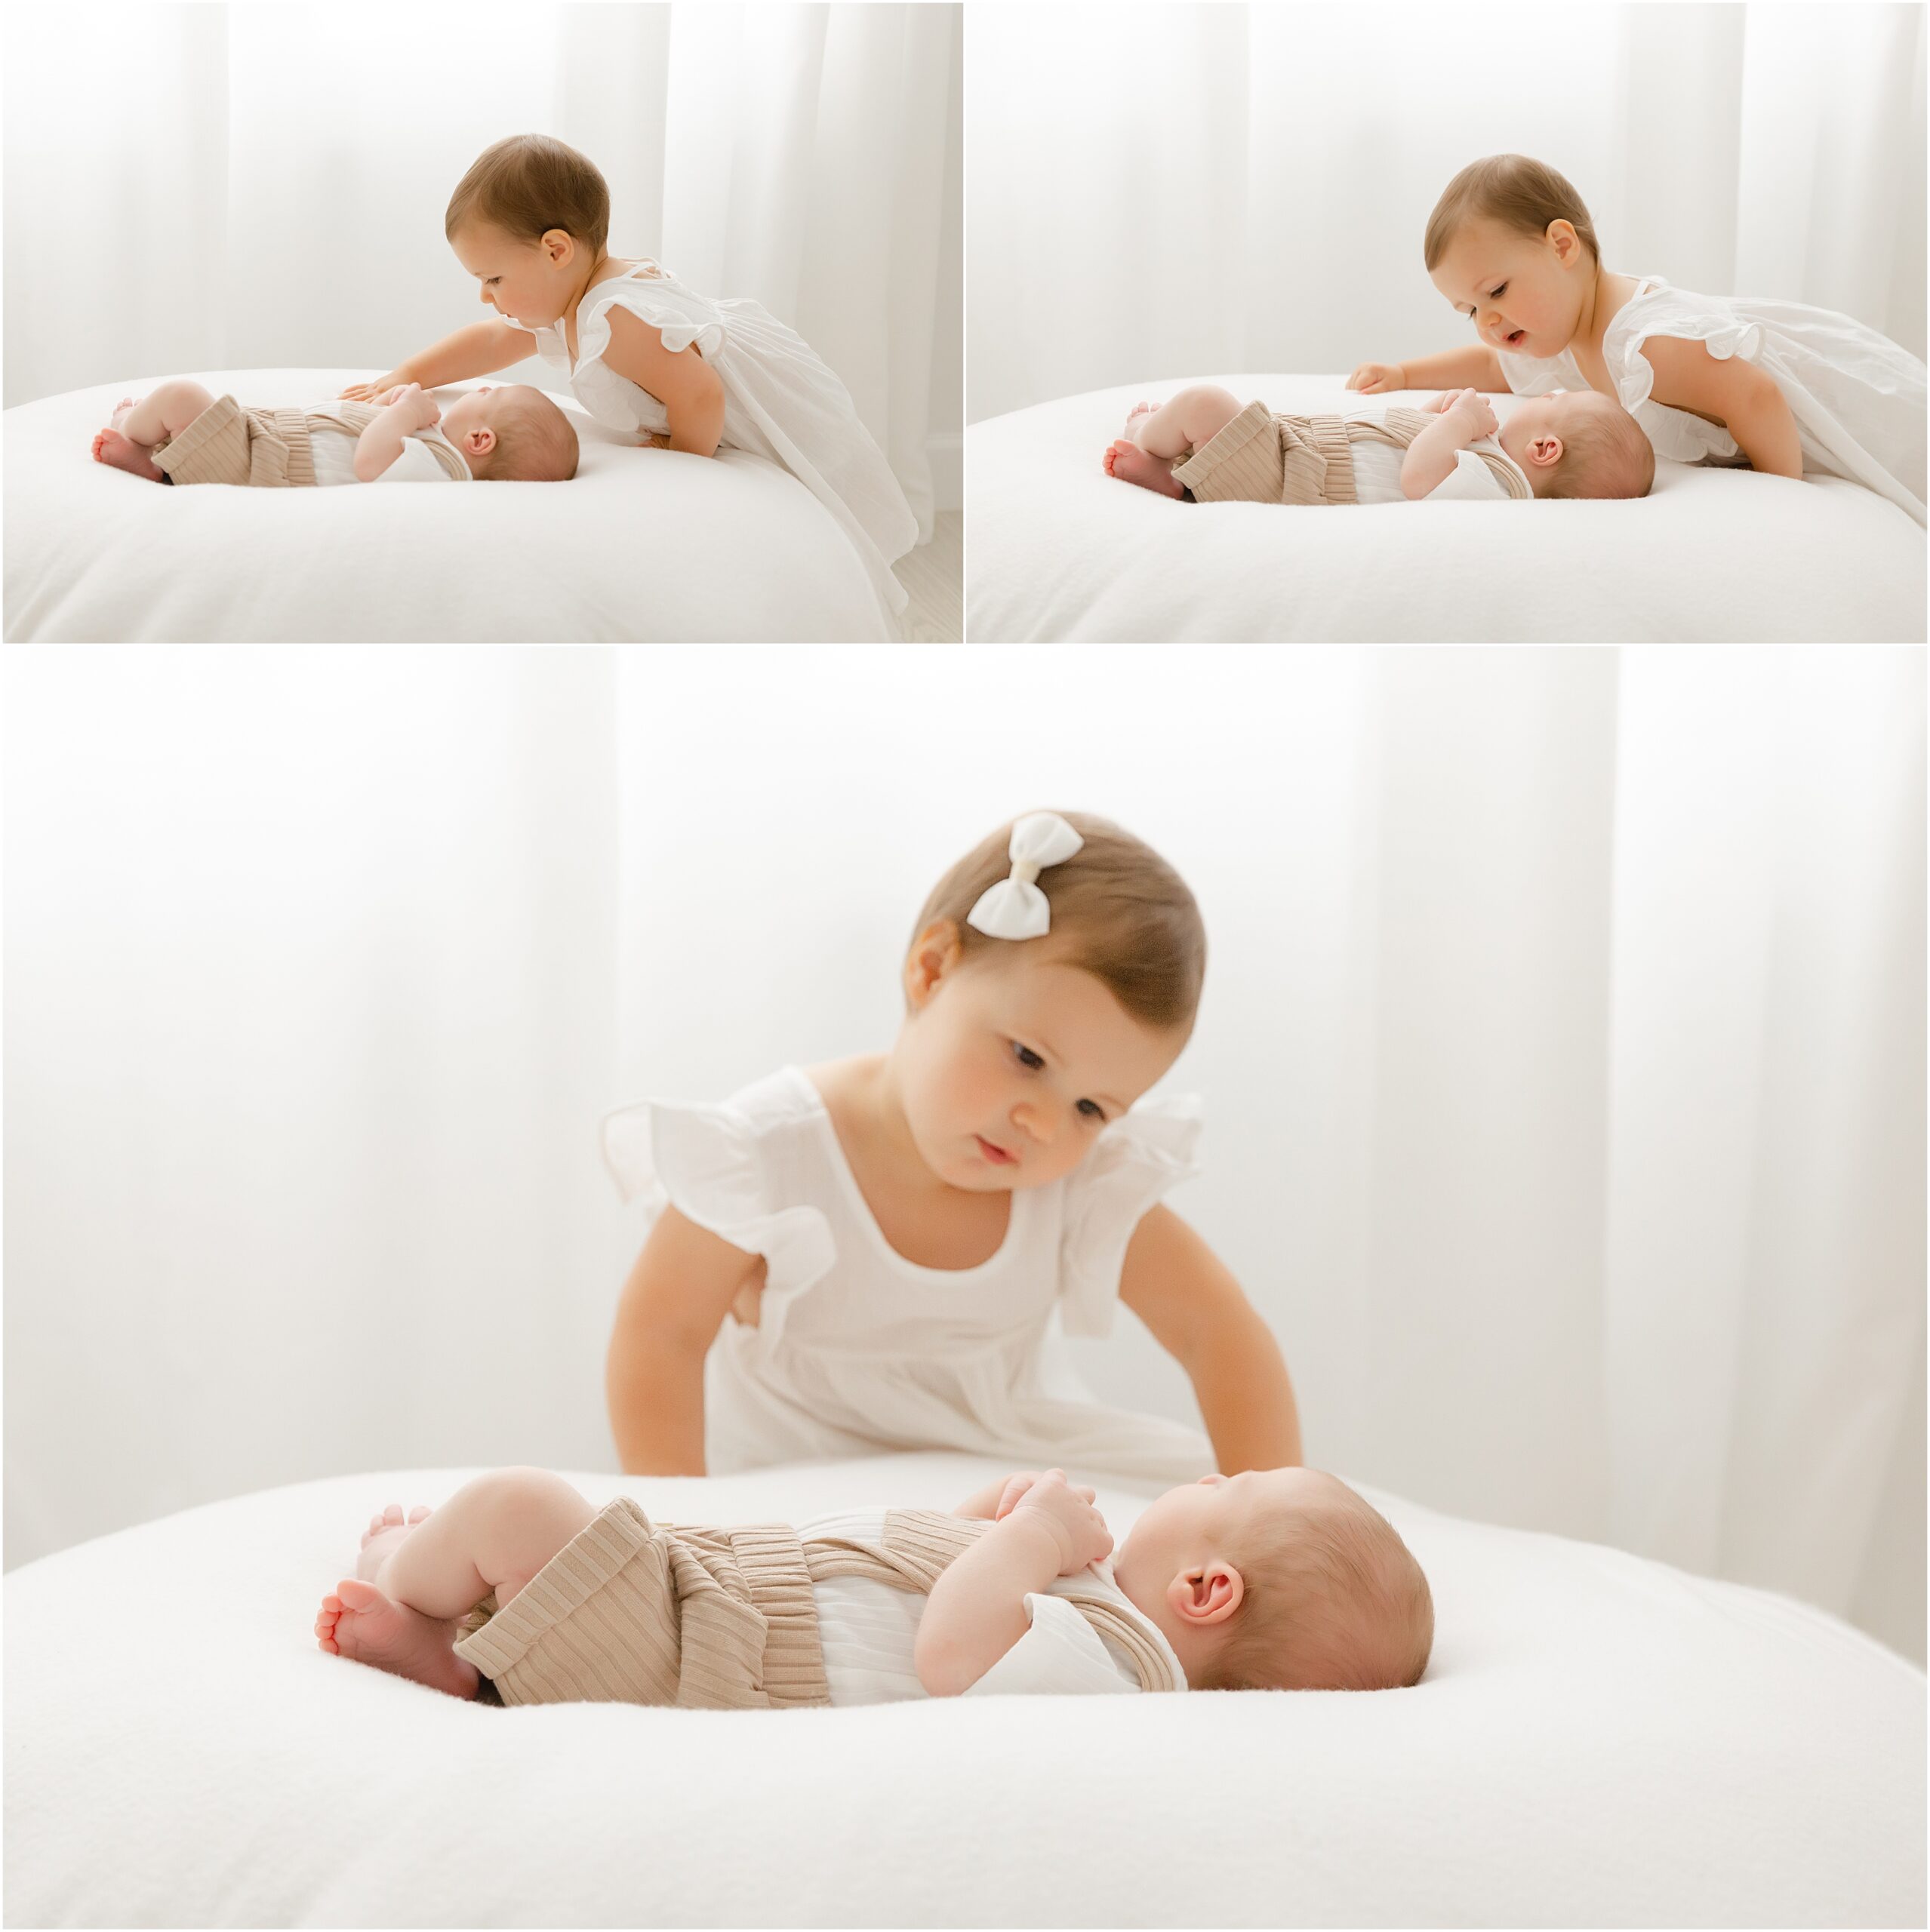 Three images showing a newborn baby laying on a beanbag with his toddler sister looking at him